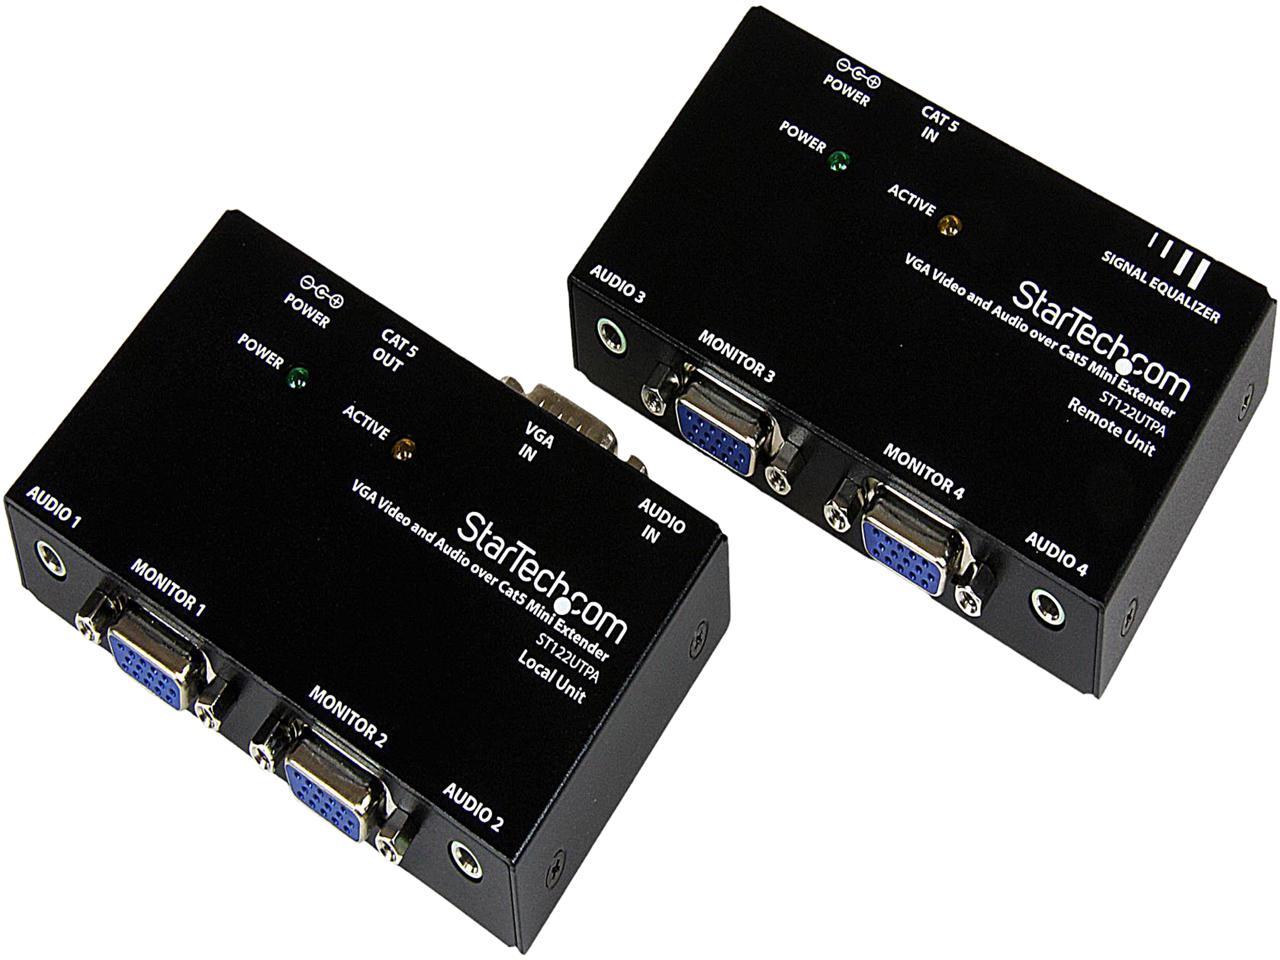 StarTech.com ST122UTPA VGA Video Extender over Cat 5 with Audio - Up to 500ft (150m) - VGA over Cat5 Extender - 1 Local and 1 Remote